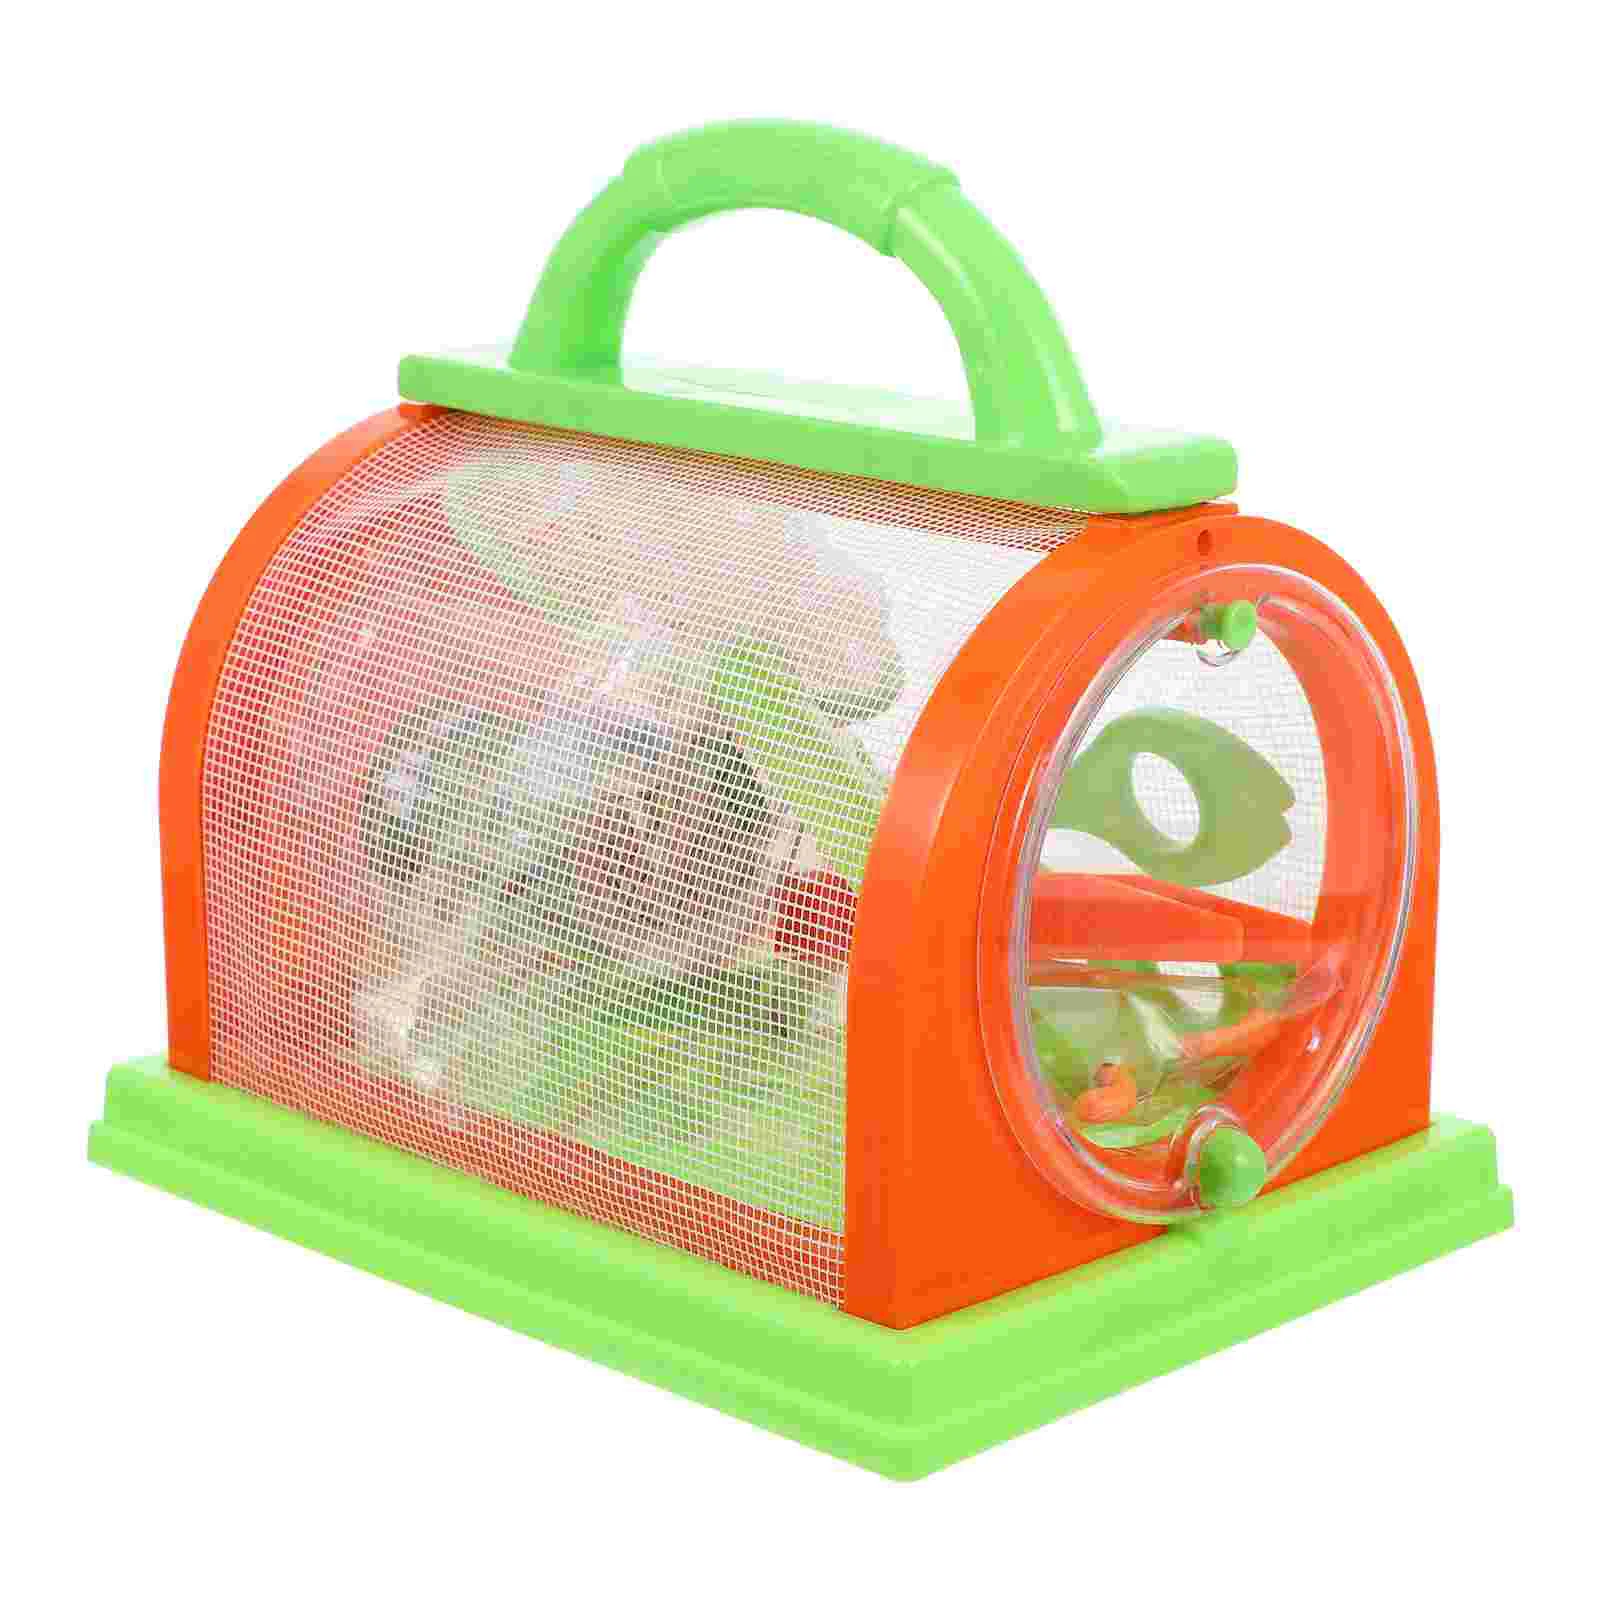 

Bug Kit Insect Catcher Toy Box Critter Observation Exploration Science Catching Kids Set Container Outdoor Collection Case